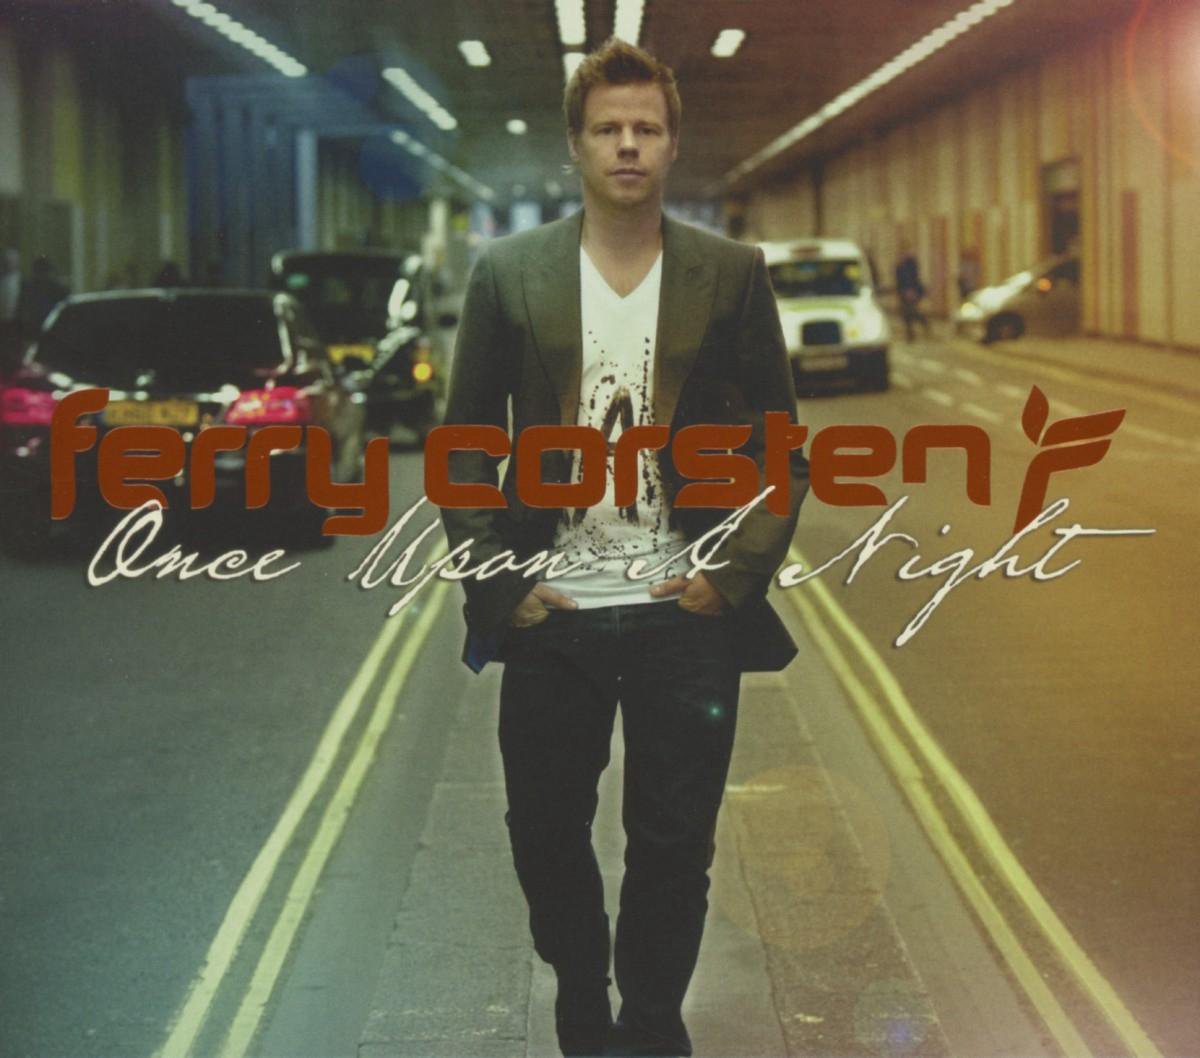 Once Upon A Night Vol. 3 - Ferry Corsten